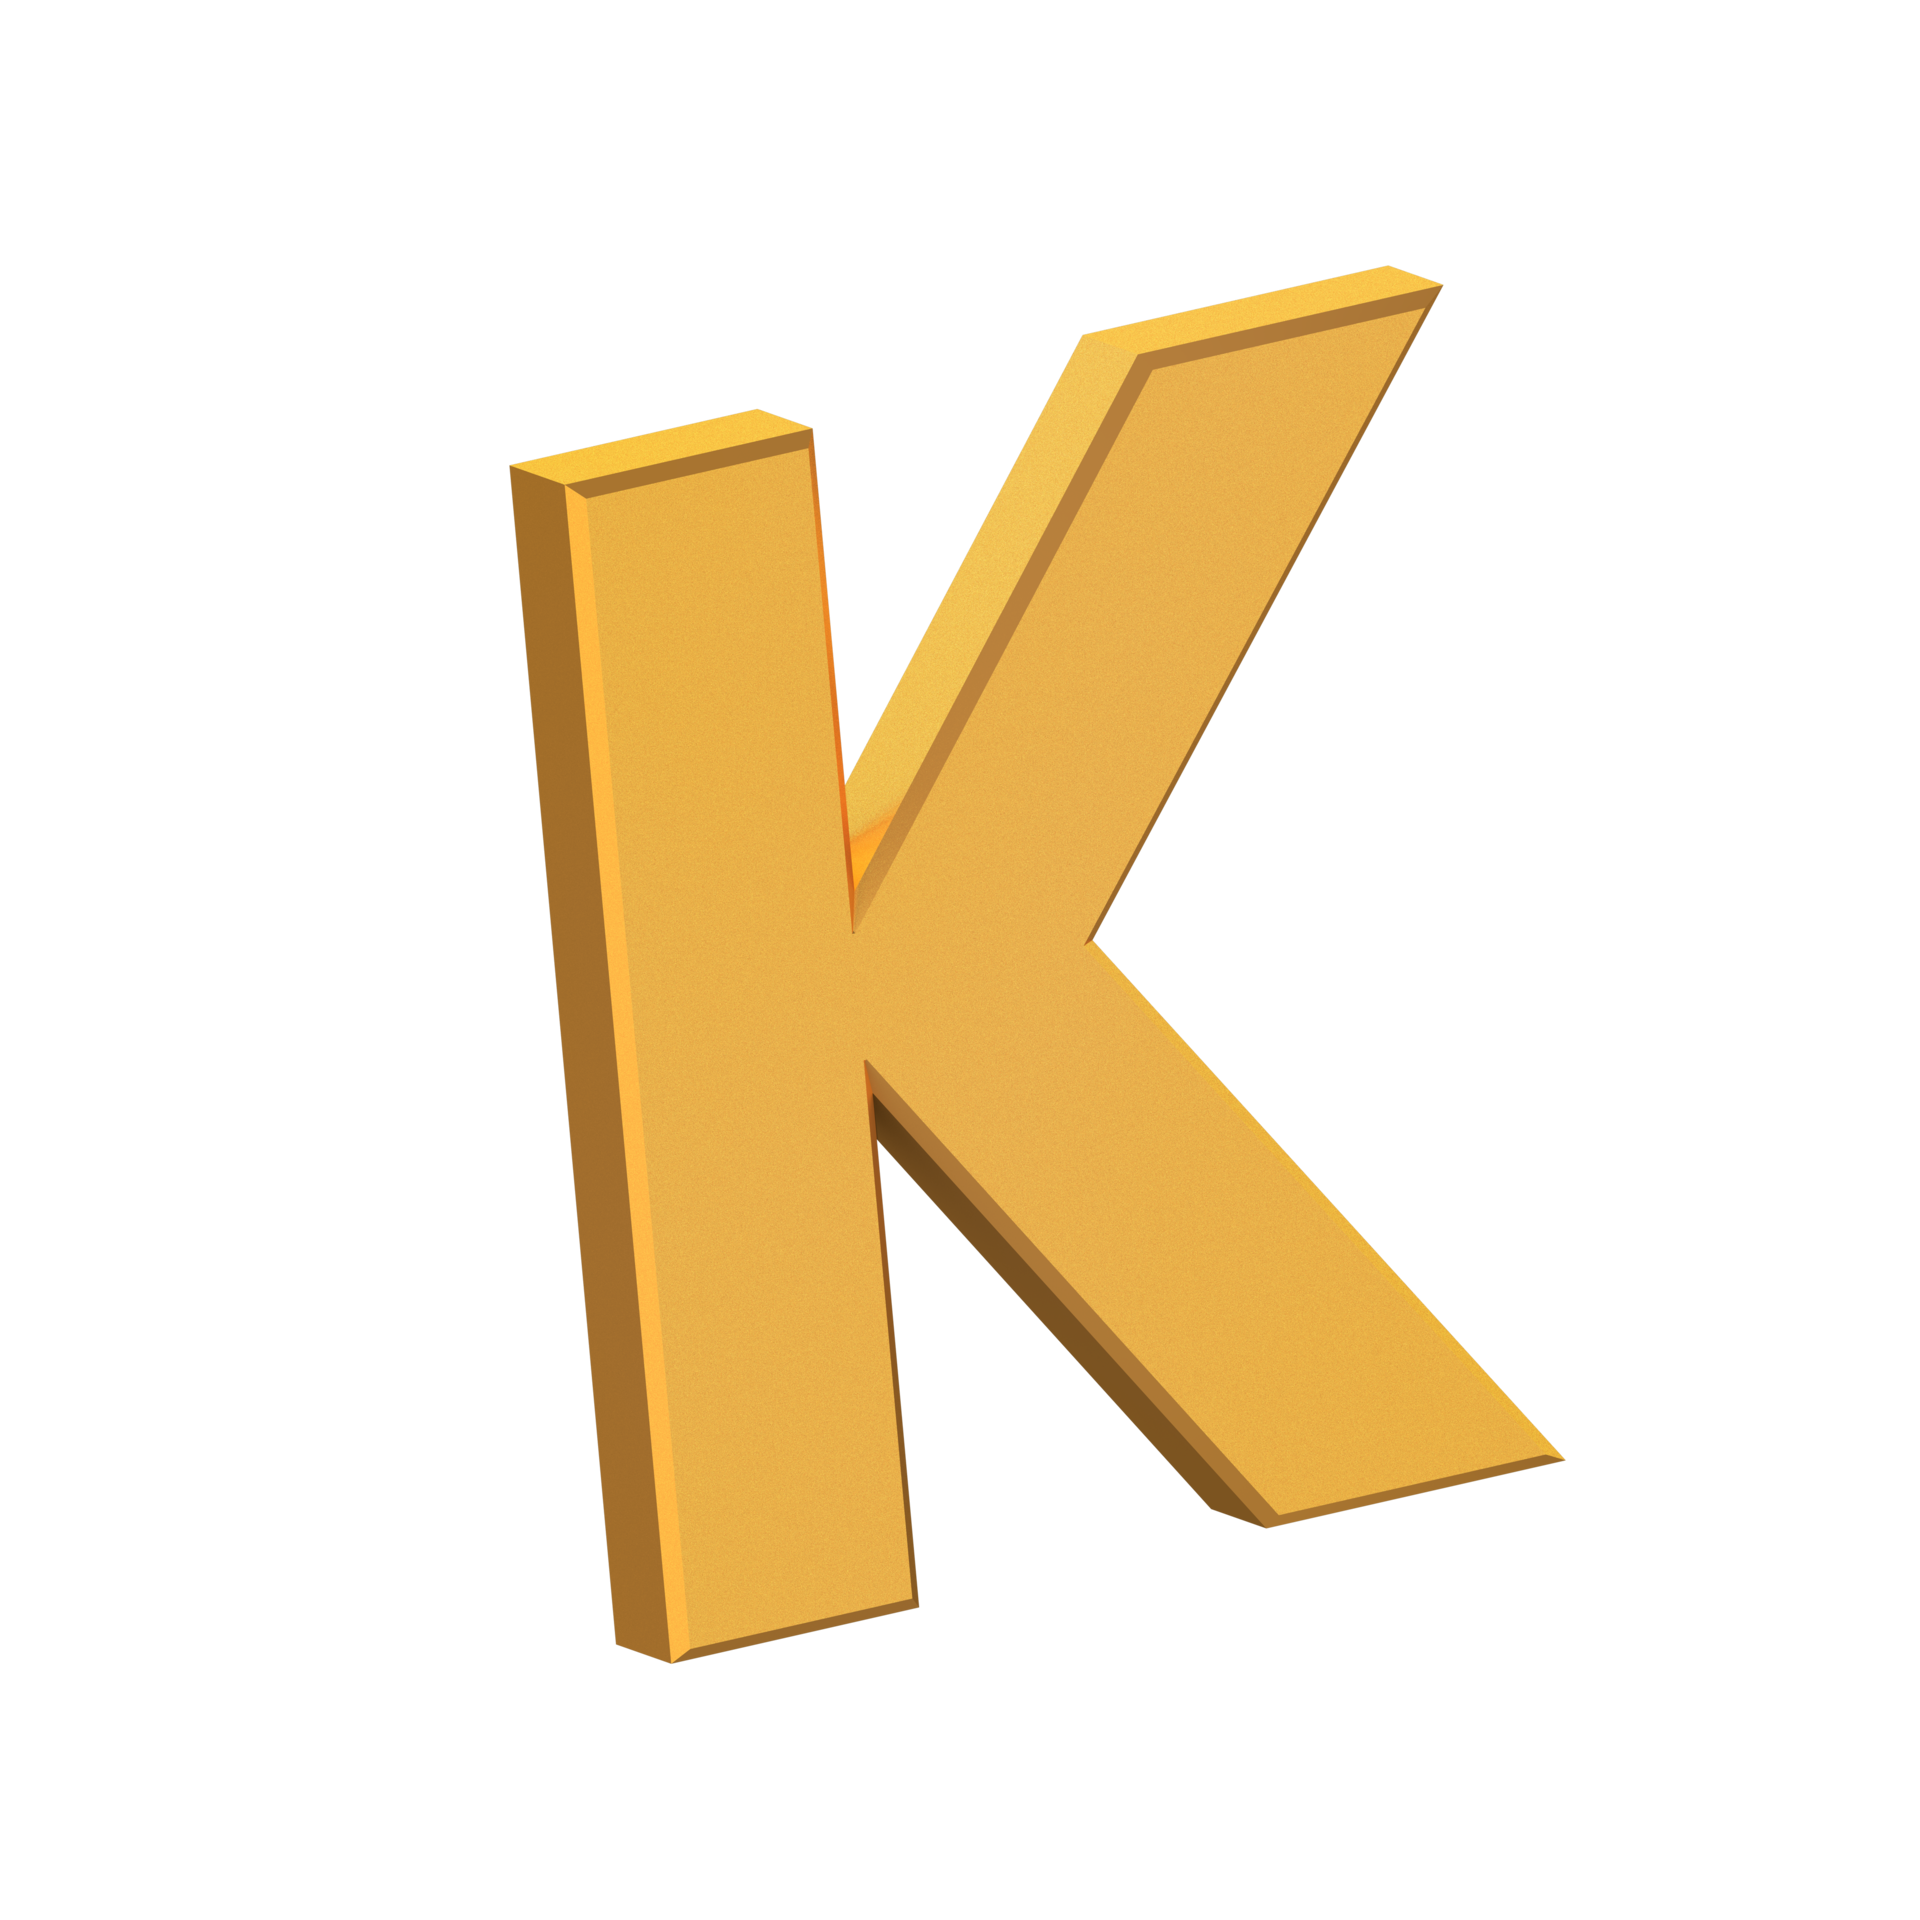 Free K 3D Letter Isolated with Transparent Background, Gold Texture, 3D  Rendering 17051620 PNG with Transparent Background